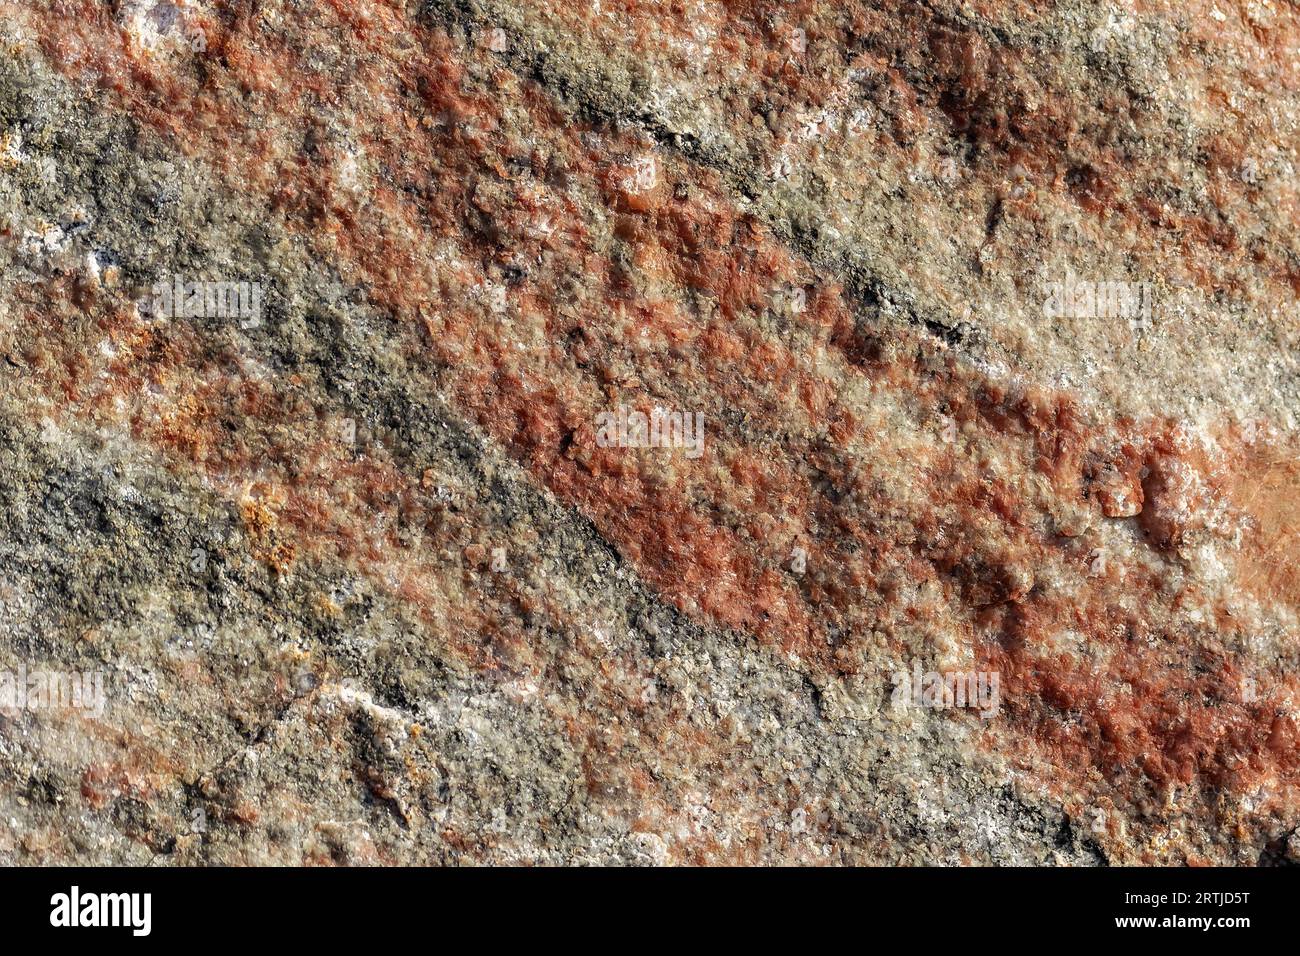 Granite stone surface with roughness and unevenness with red and gray veining for use as an abstract background and texture. Stock Photo